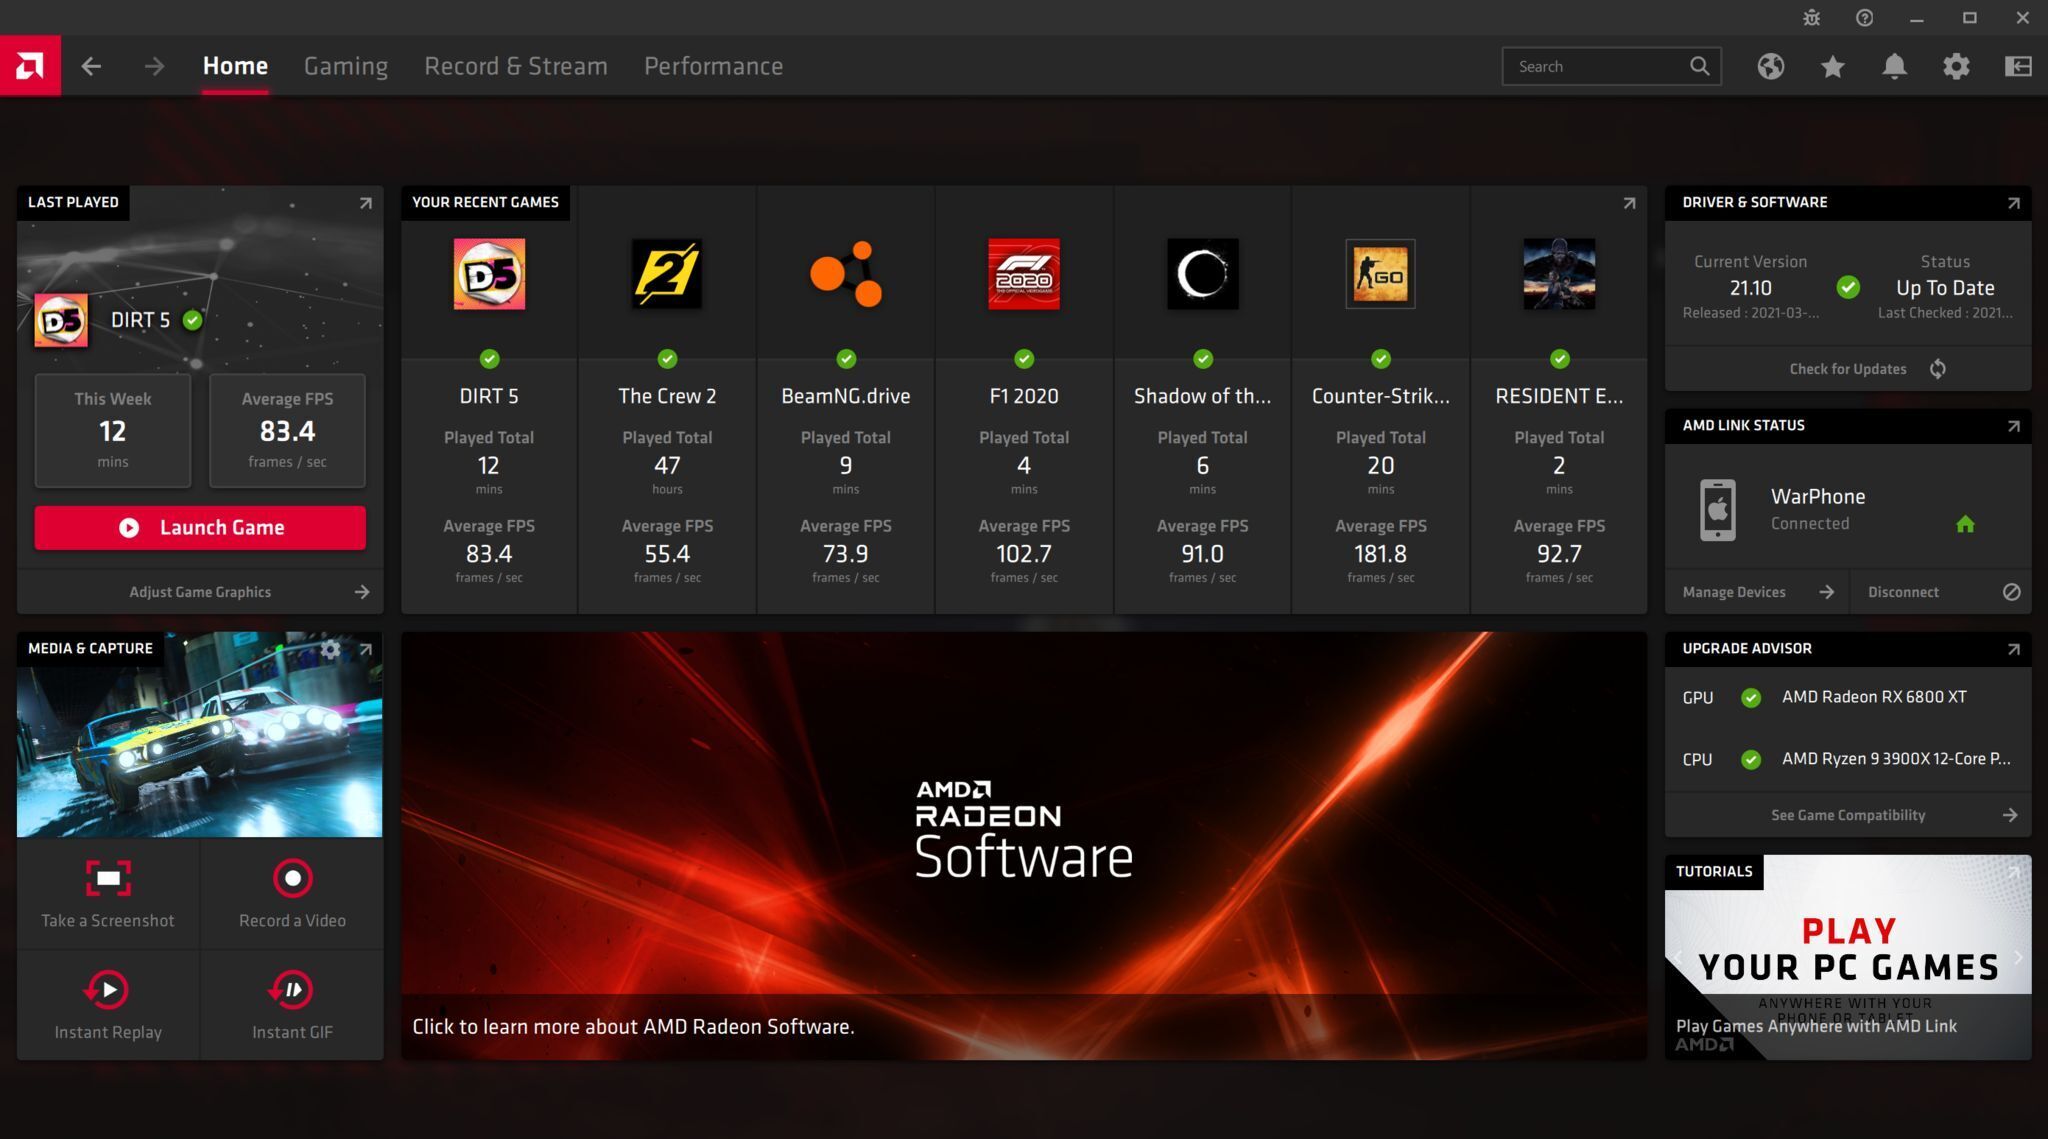 download amd graphics software